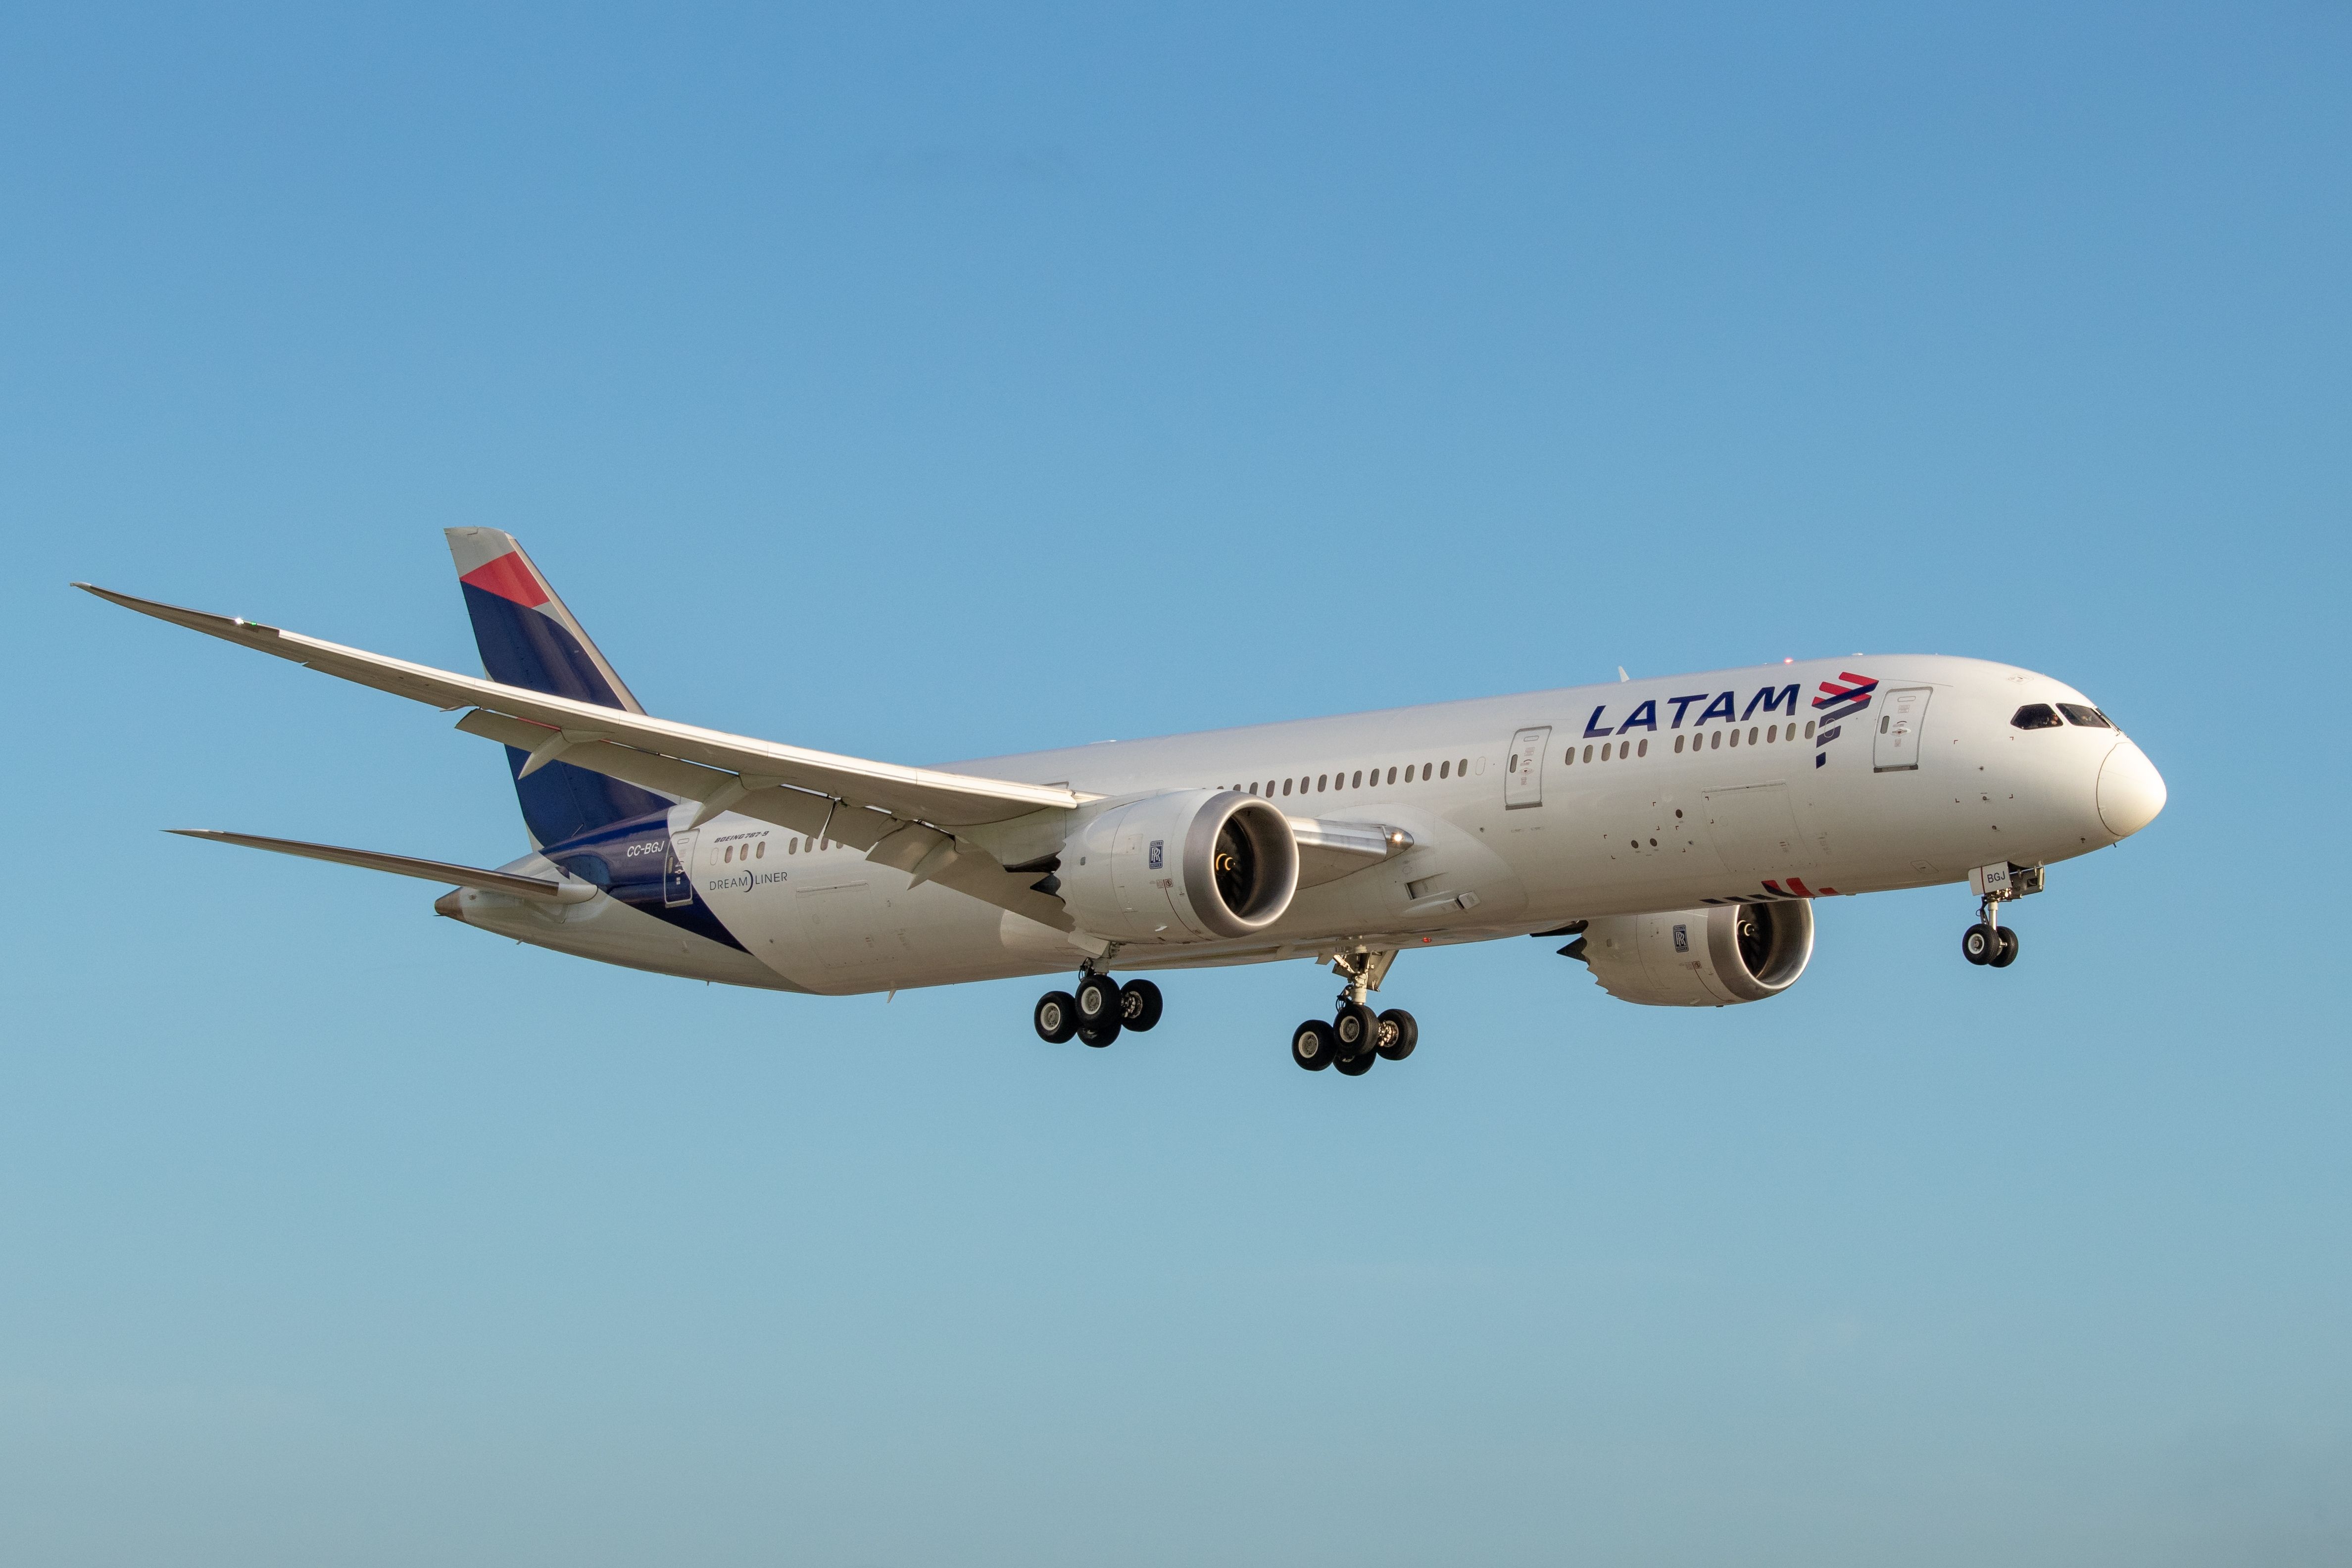 A LATAM Airlines Boeing 787 Dreamliner on final approach to land at Miami International Airport.